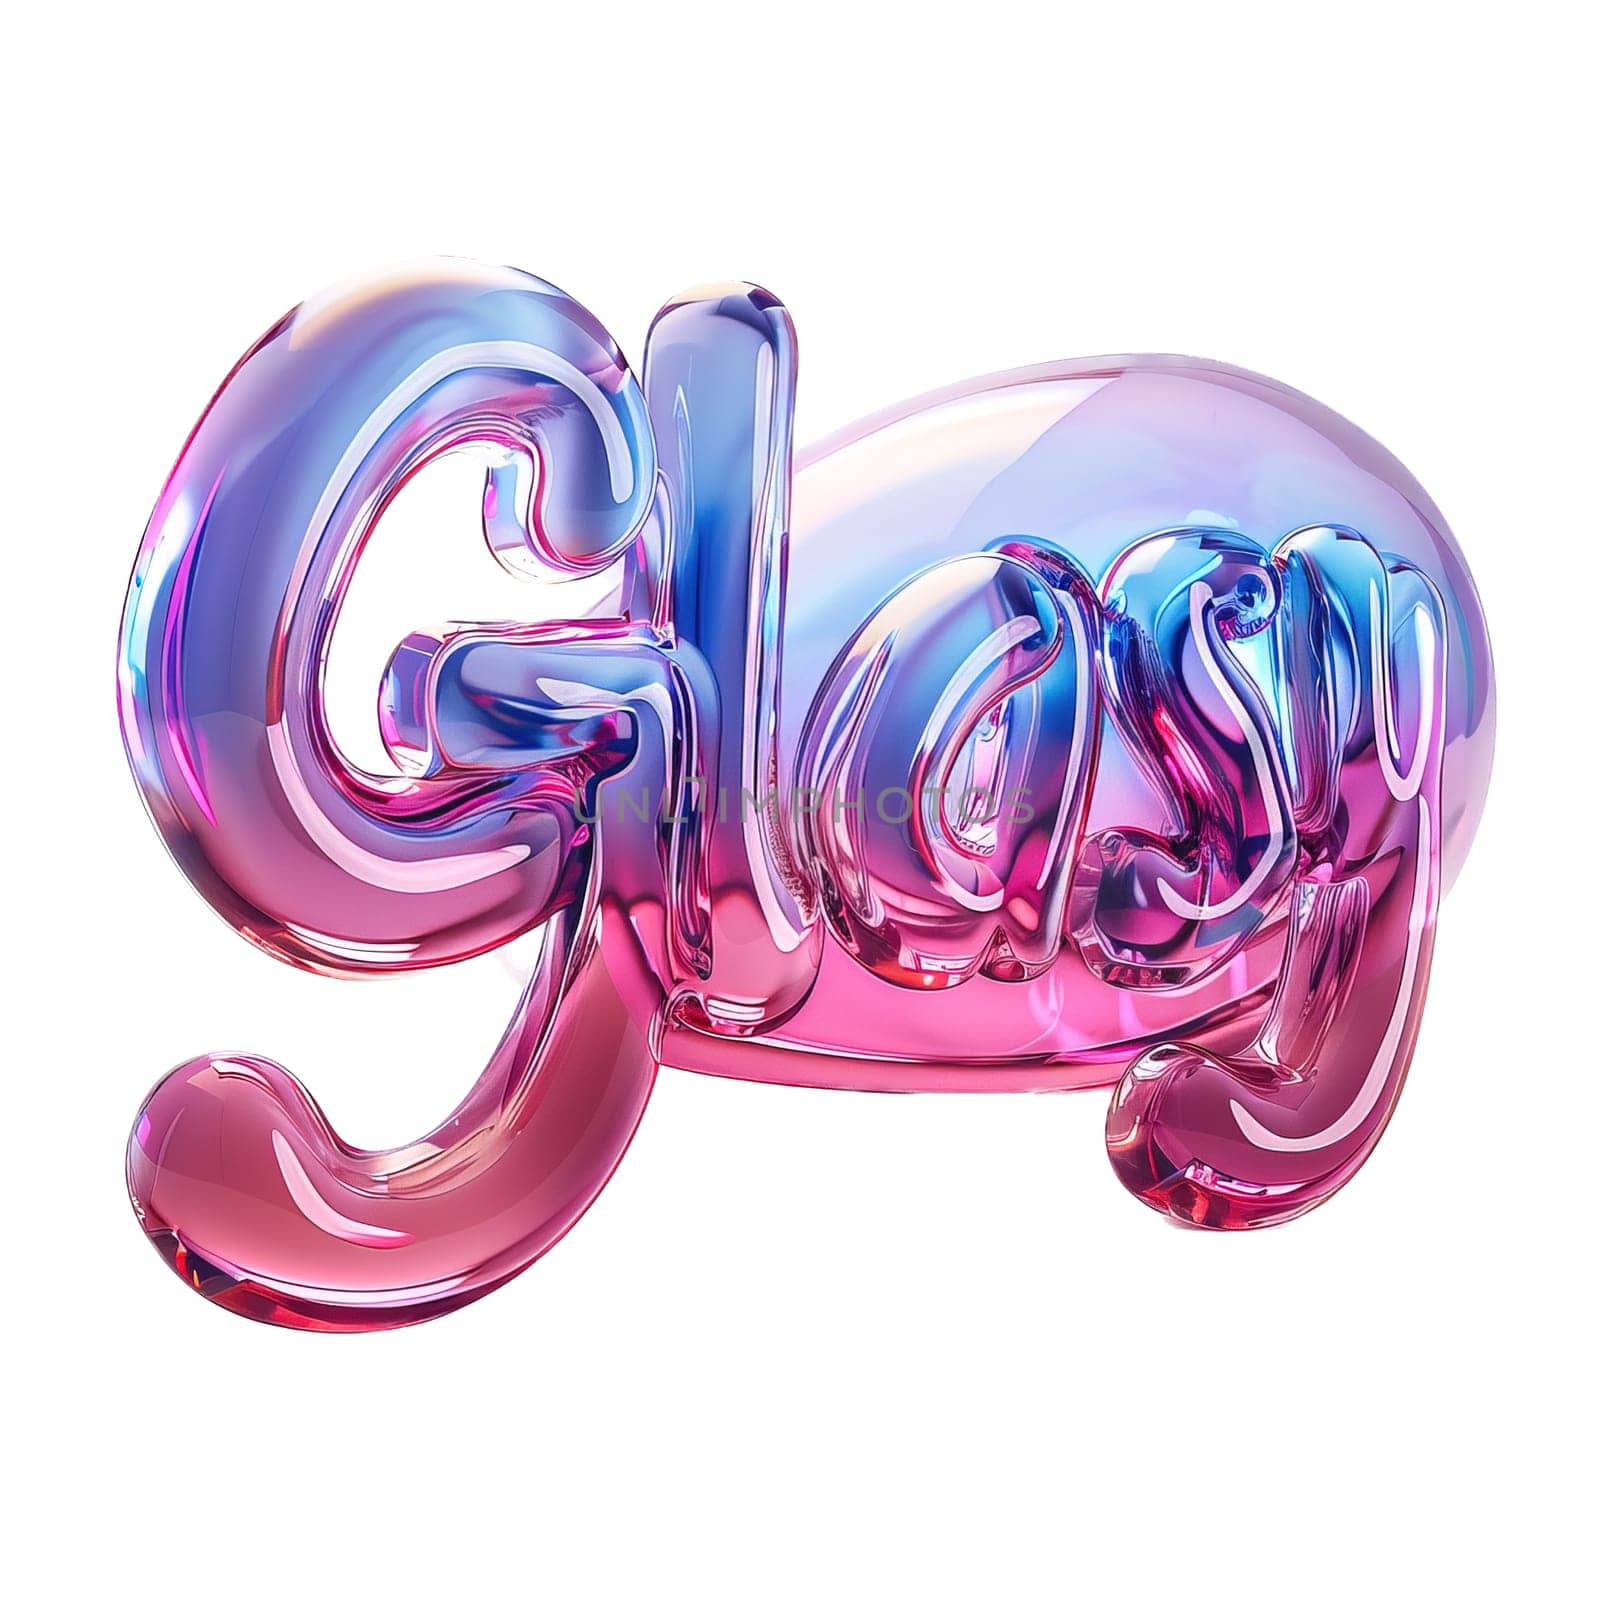 glassy pink and blue "Glasy" for logo in the style of neumorphism, soft natural lighting simple and elegant space, close-up, super high detaill by mr-tigga